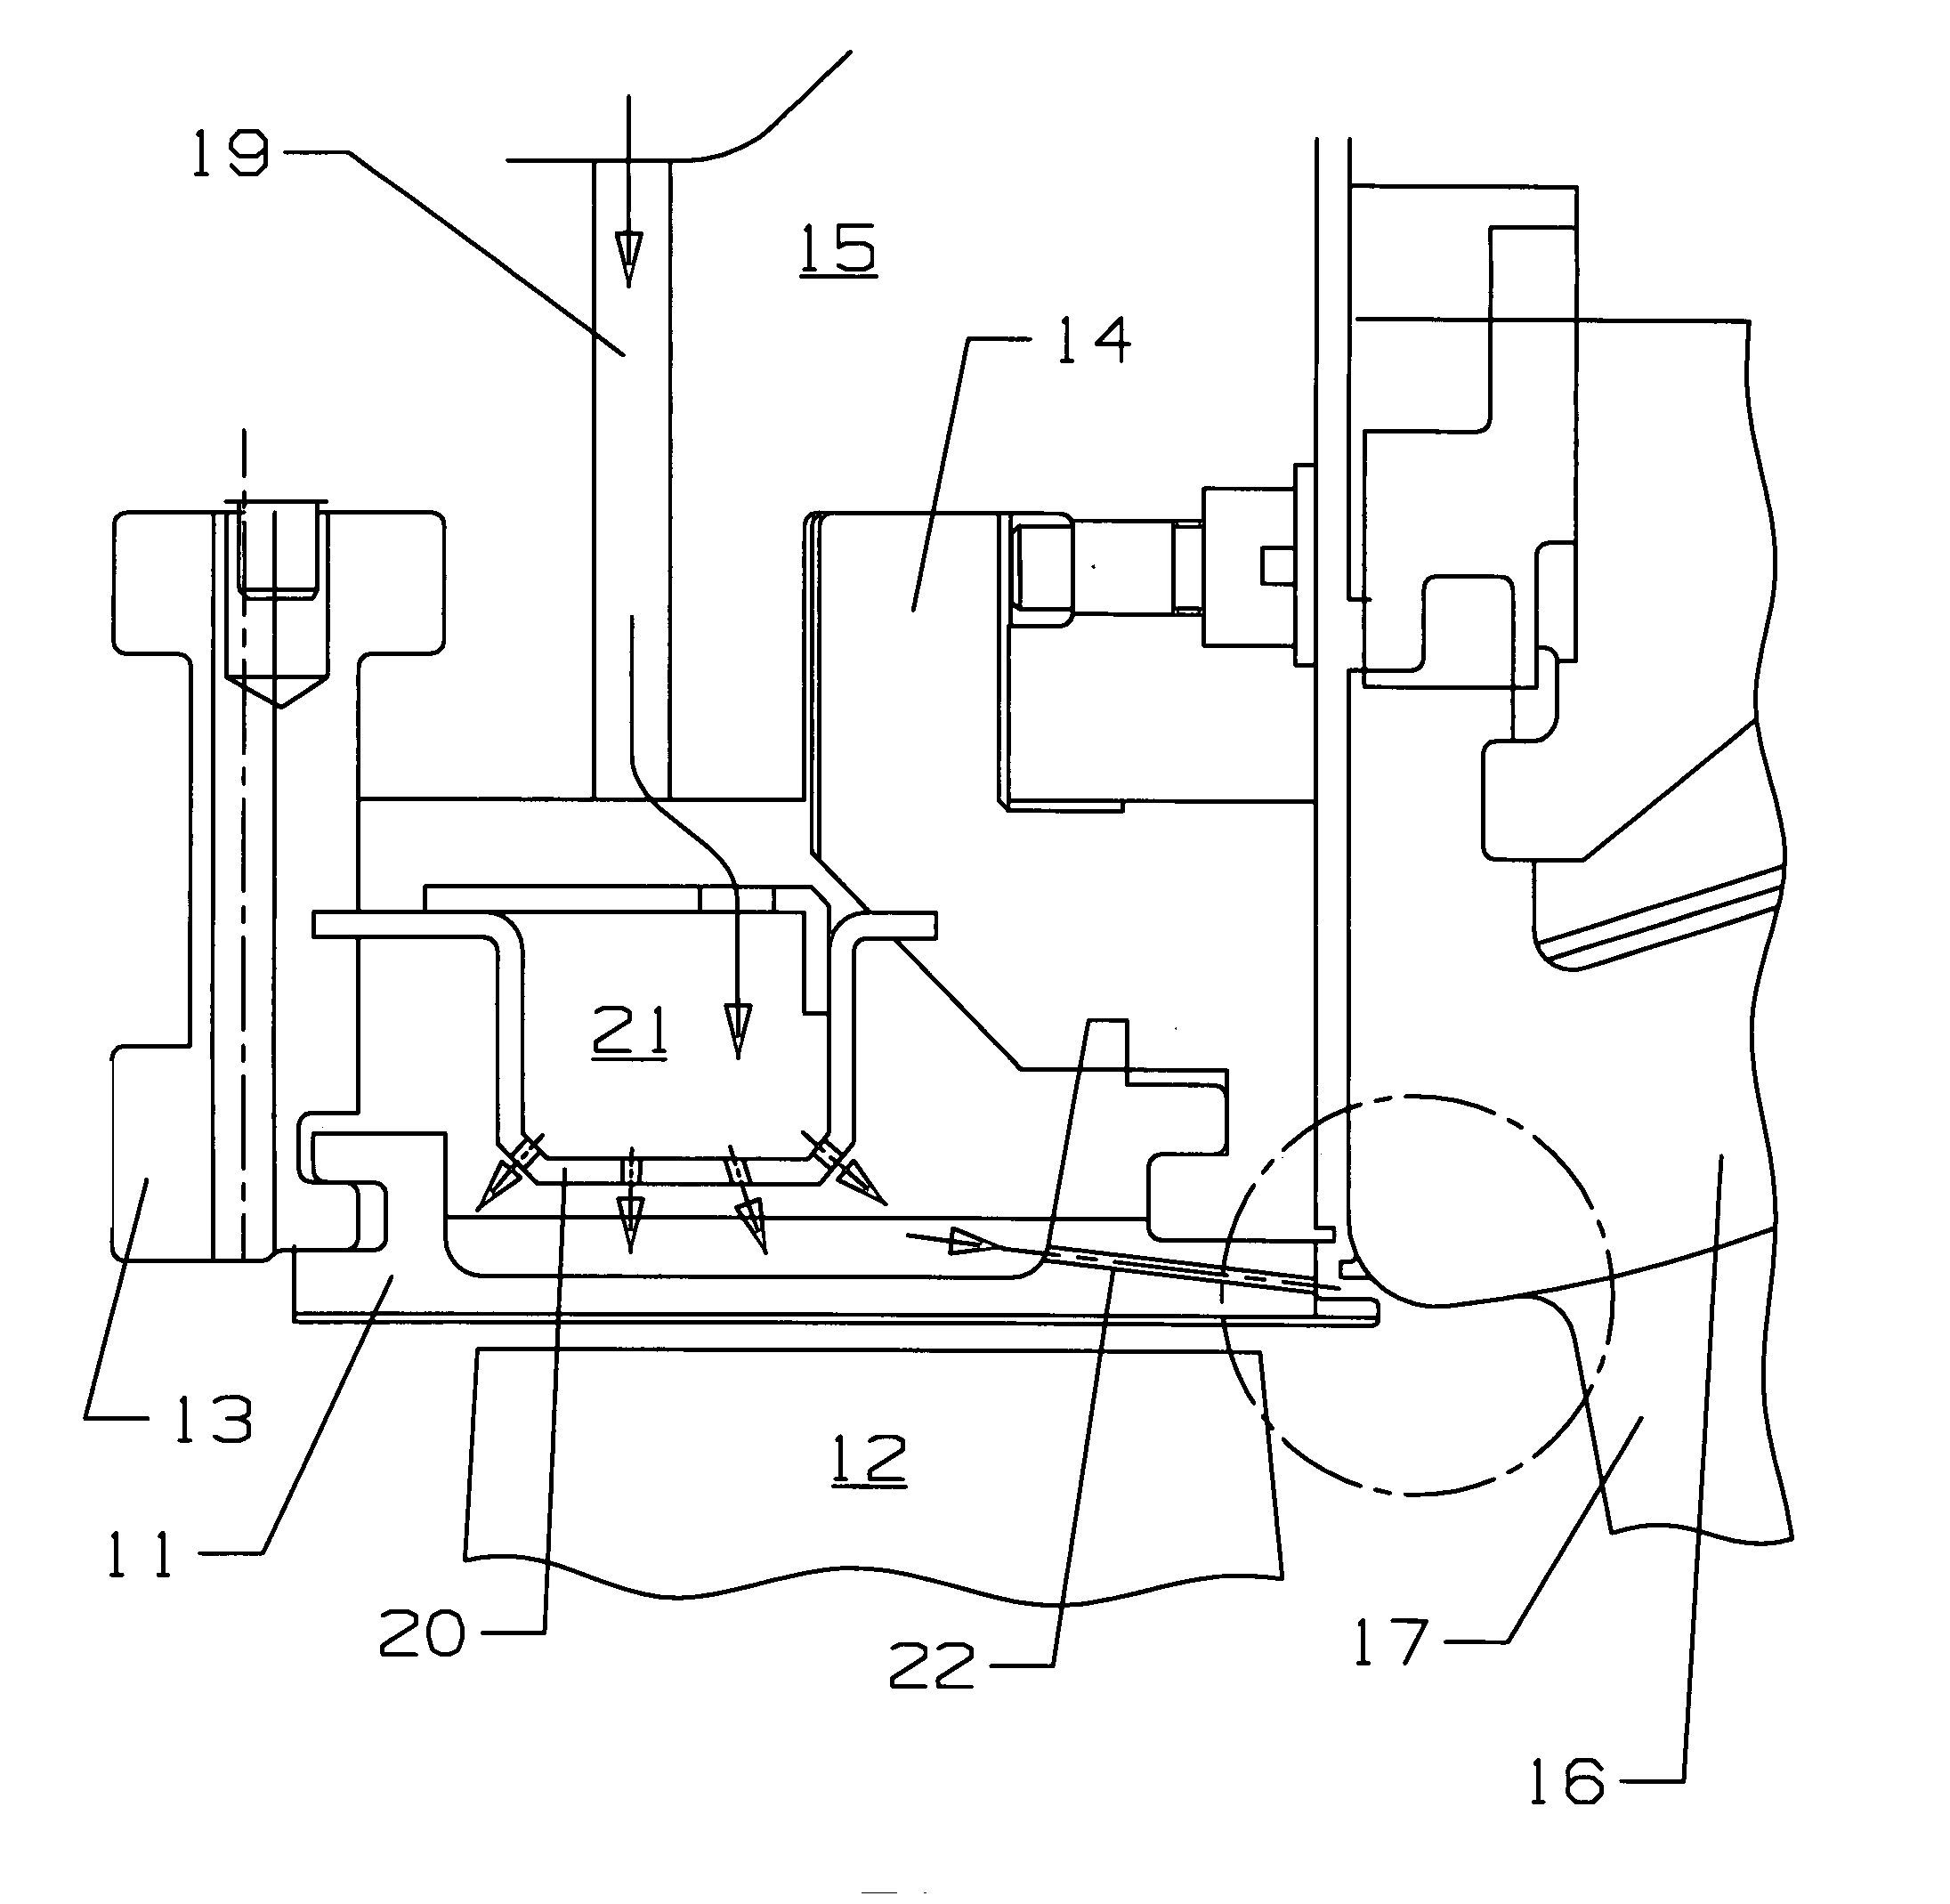 Turbine inter-stage gap cooling and sealing arrangement